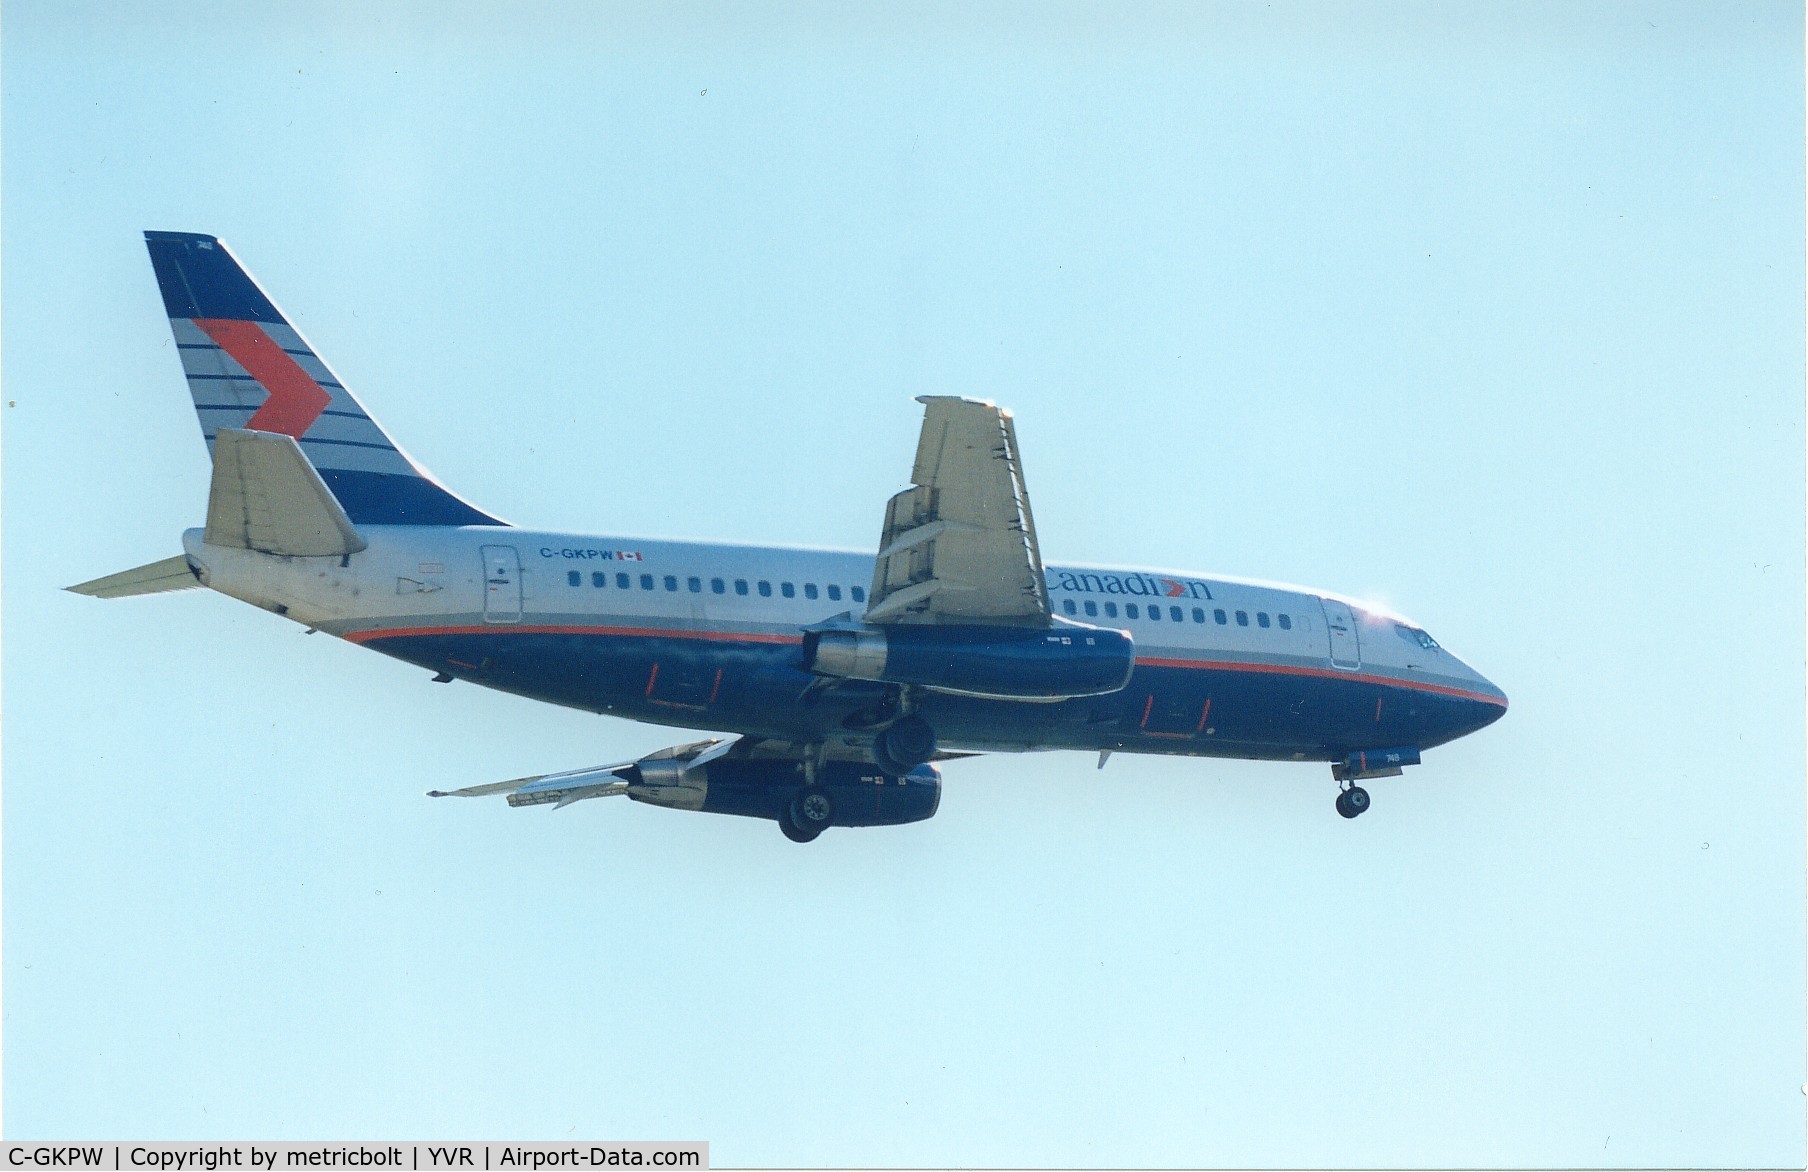 C-GKPW, 1980 Boeing 737-275 C/N 21819, In Canadian Airlines livery,late 90s